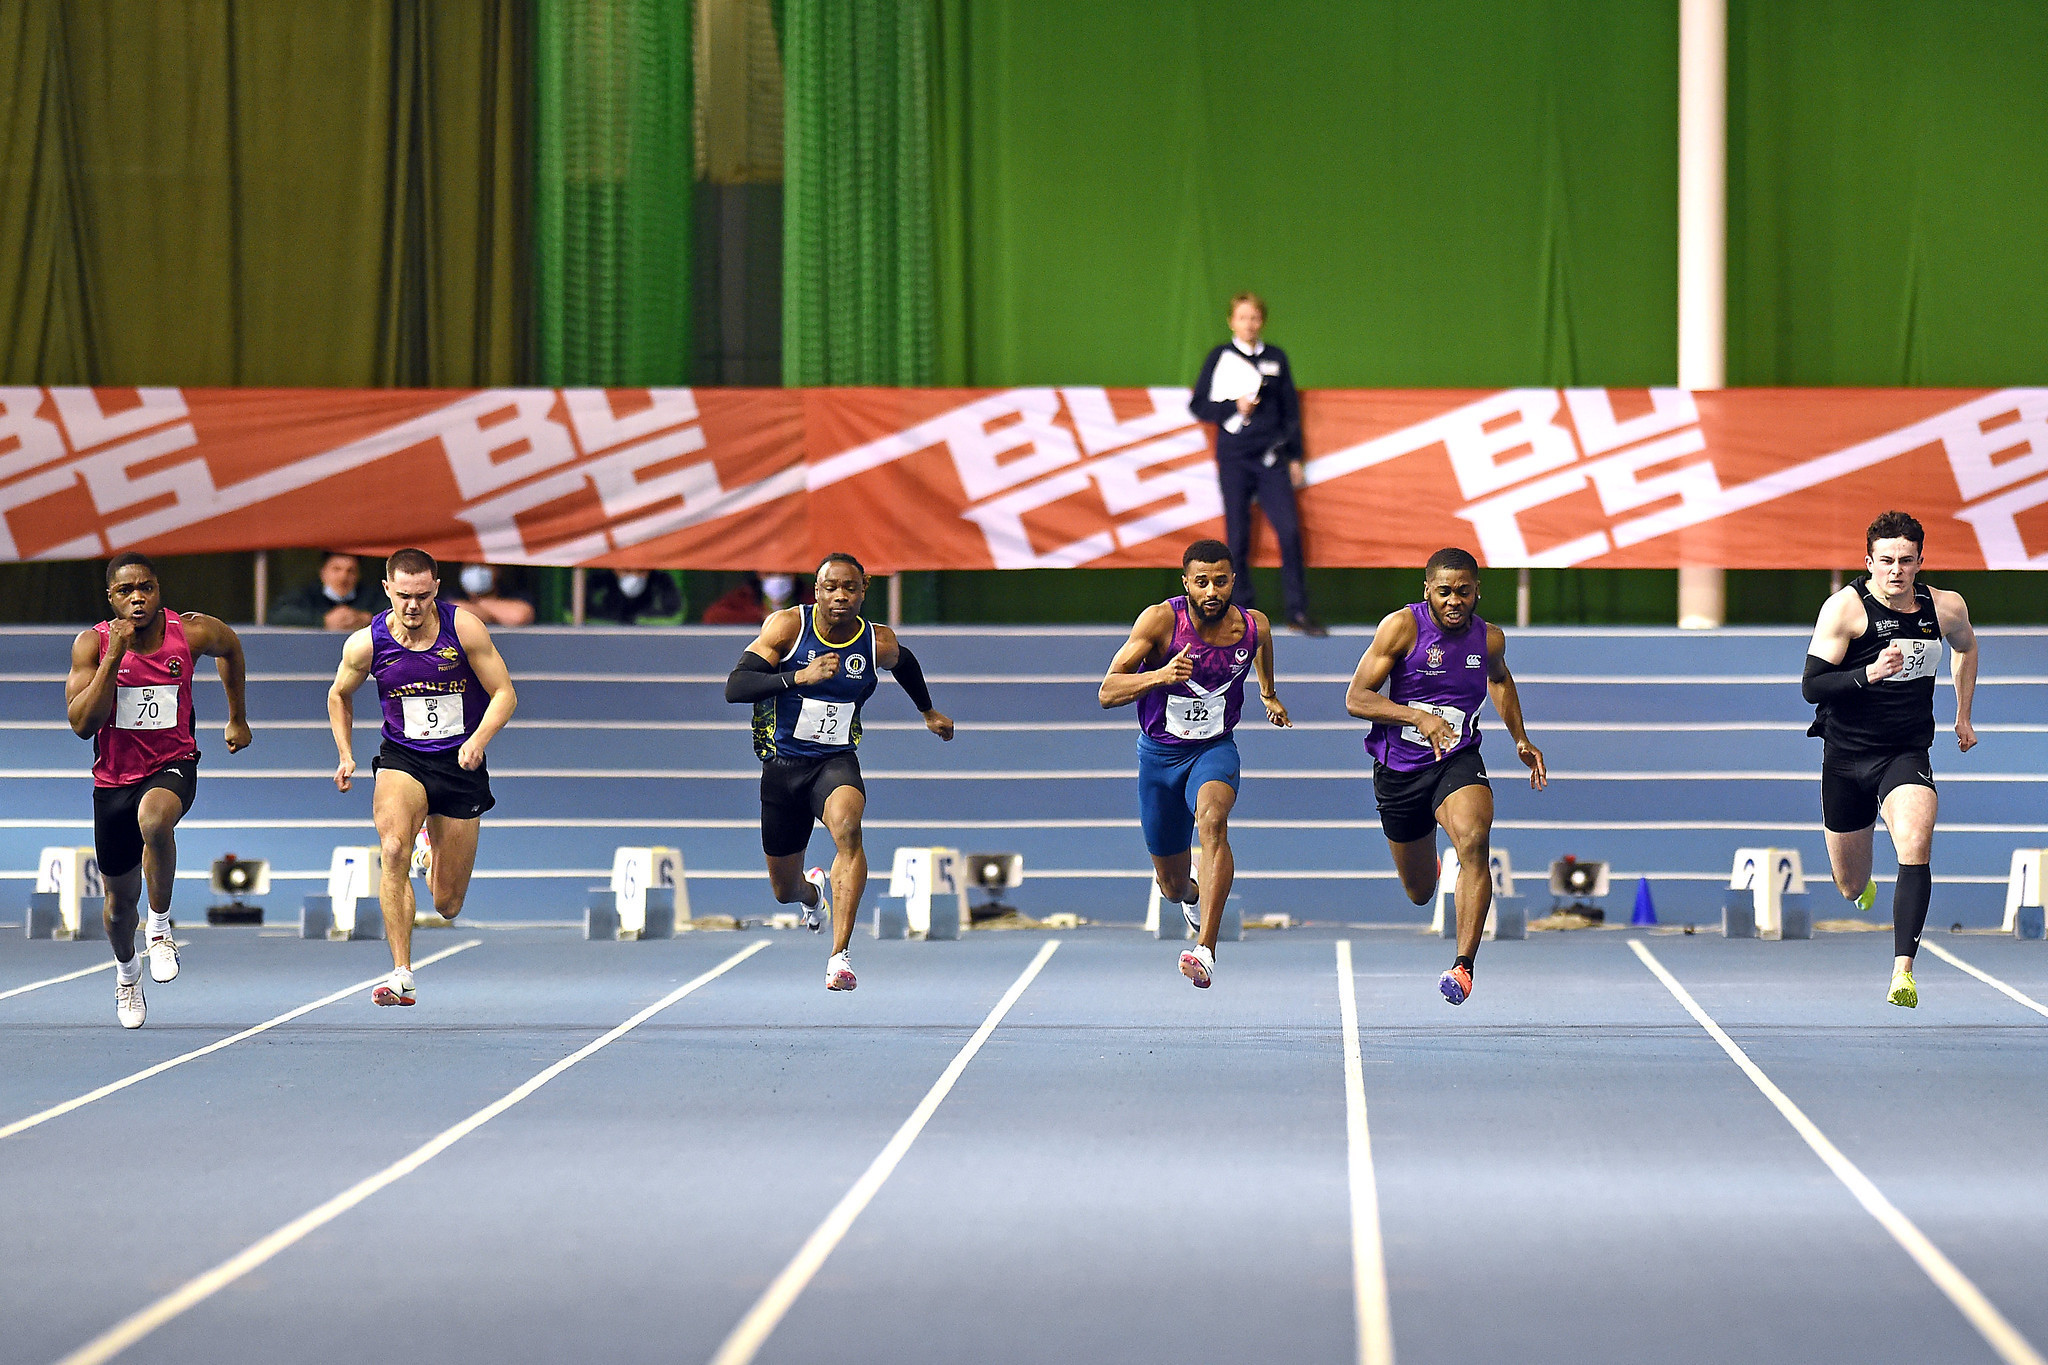 Britain is set to send 285 athletes to compete at European University Championships across 11 sports this year ©BUCS